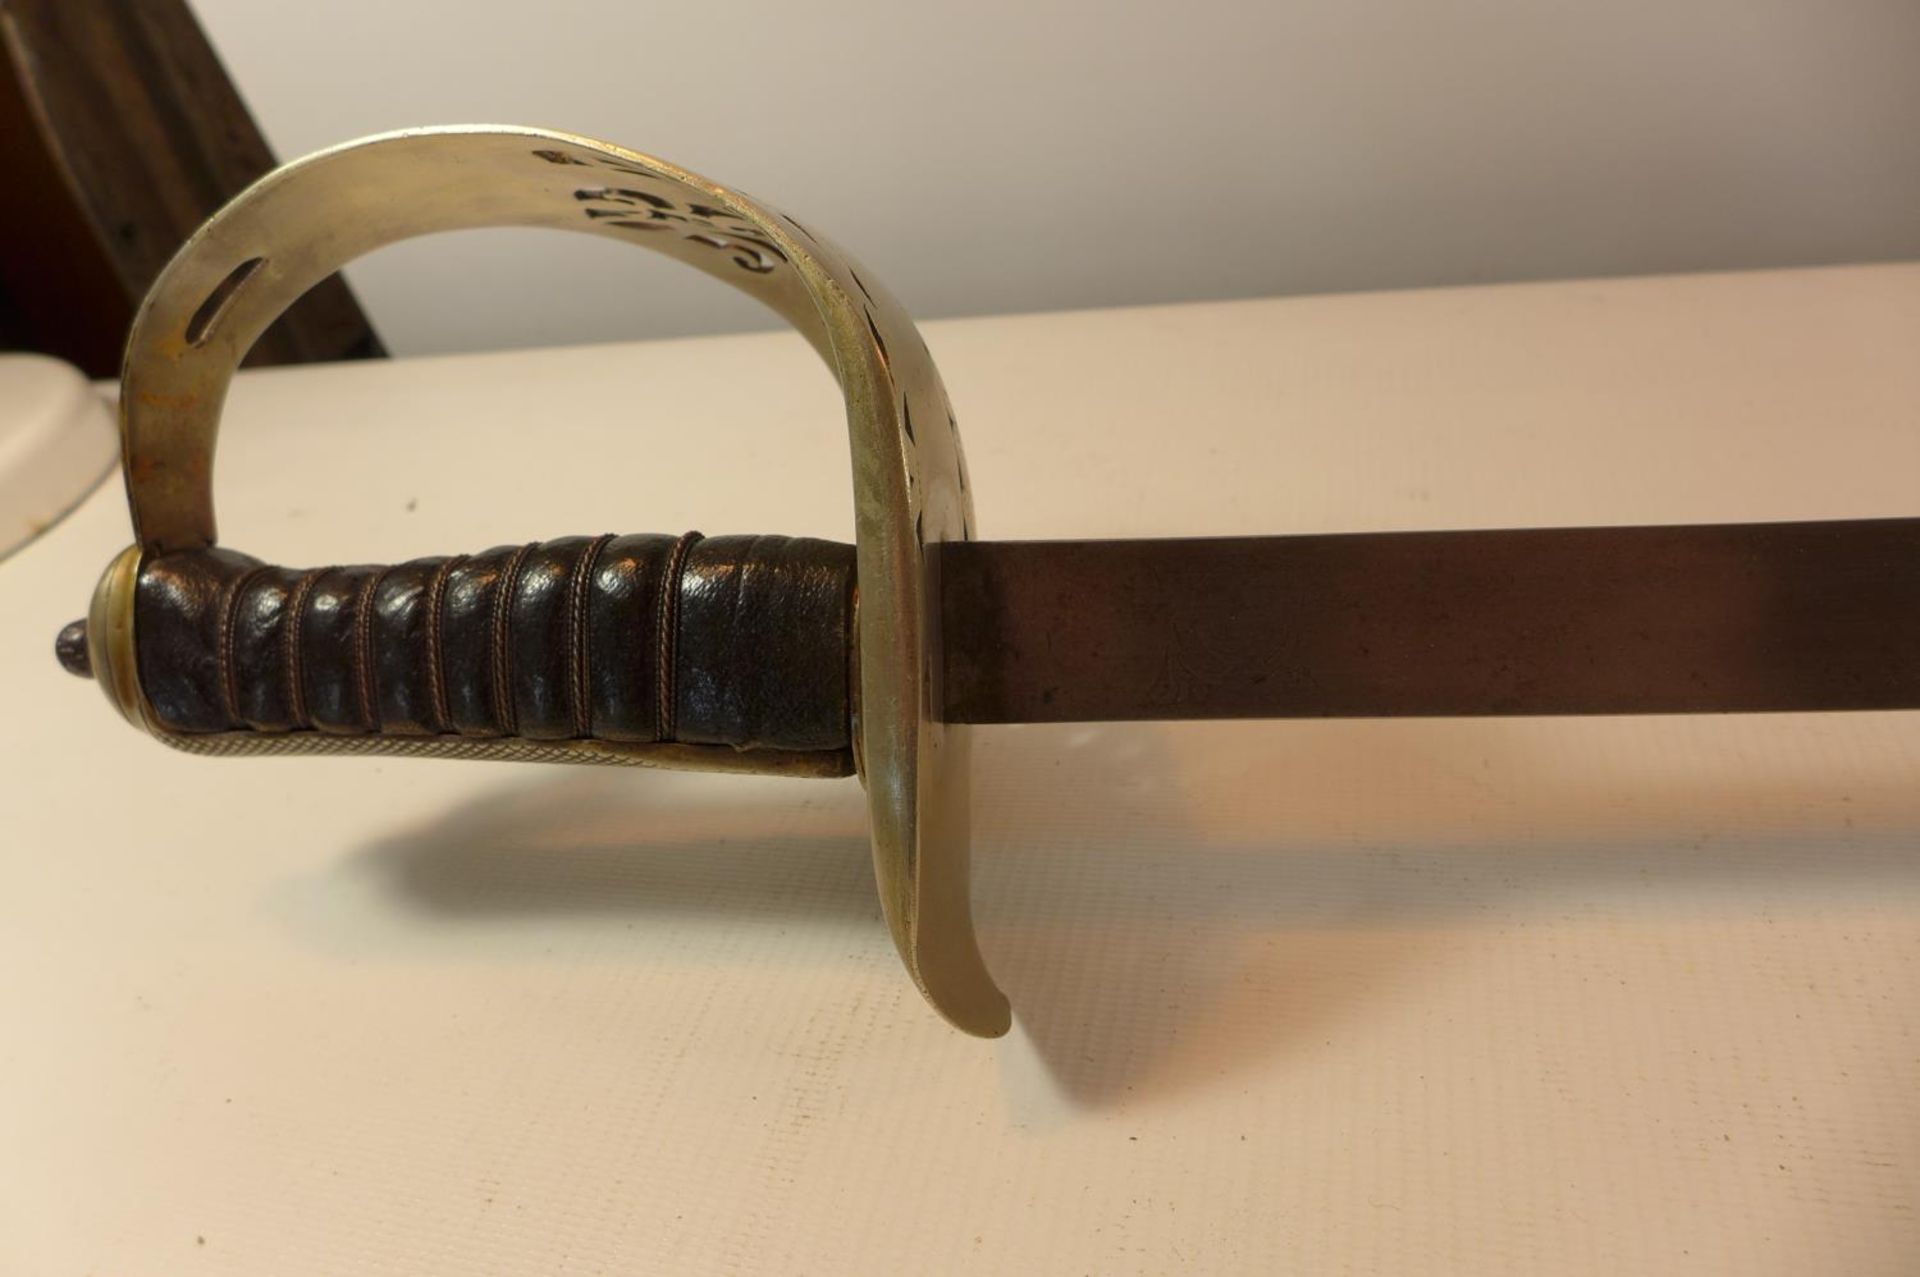 A GEORGE V 1895/97 INFANTRY OFFICERS SWORD, 82CM BLADE WITH LEATHER SCABBARD - Image 7 of 10